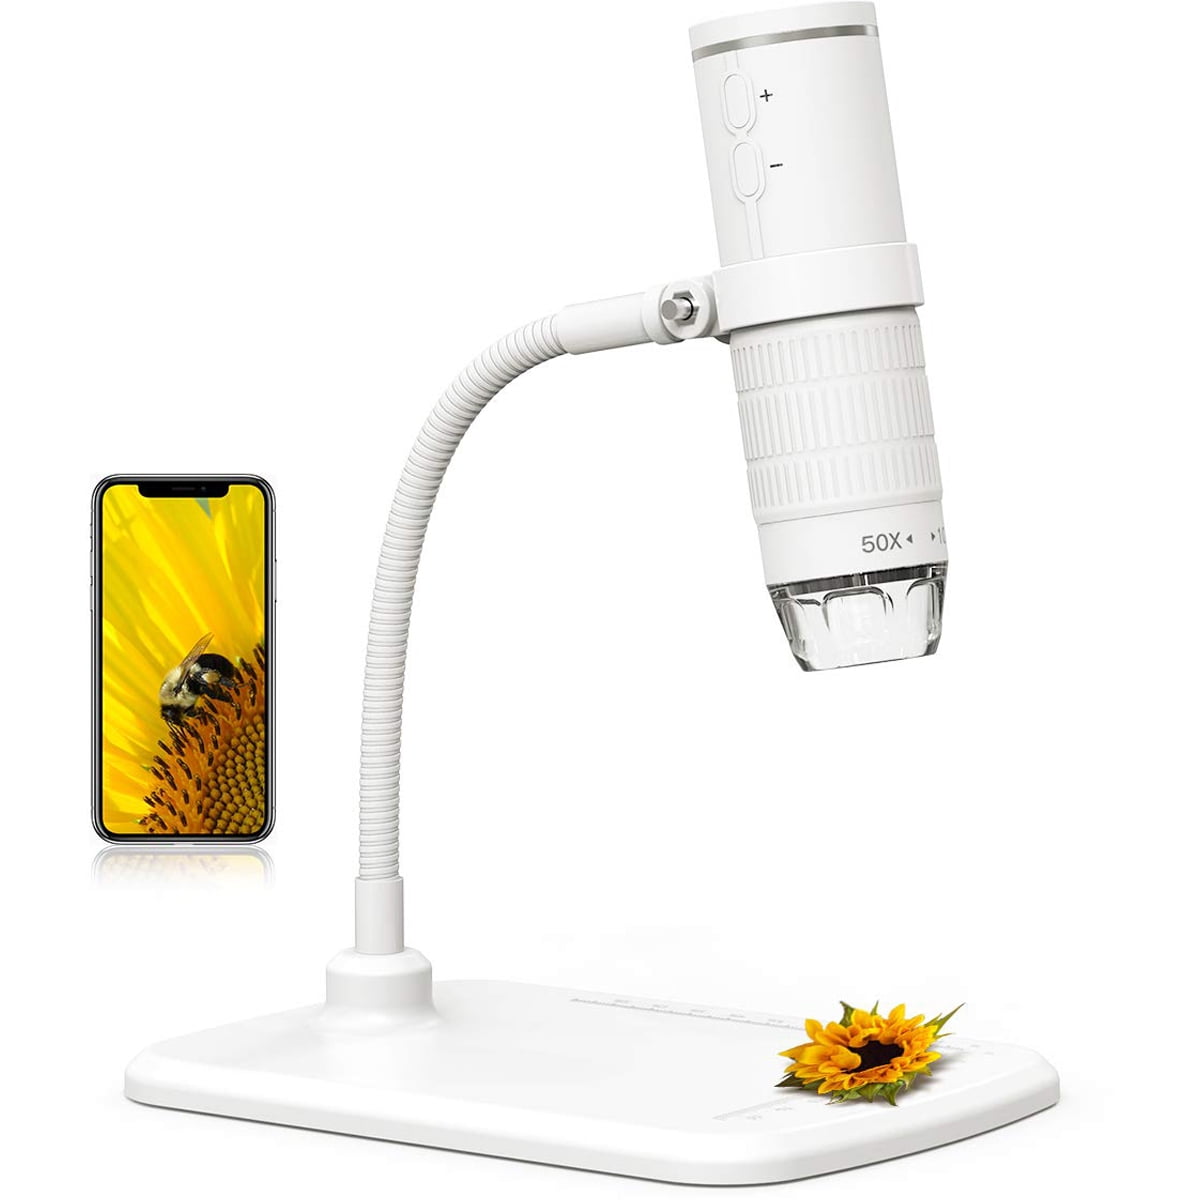 1080P FHD WiFi USB Microscope 50X to 1000X Magnification Endoscope Amplifier Compatible with Android and iOS Smartphone or Tablet Windows PC Mac Wireless Digital Microscope 